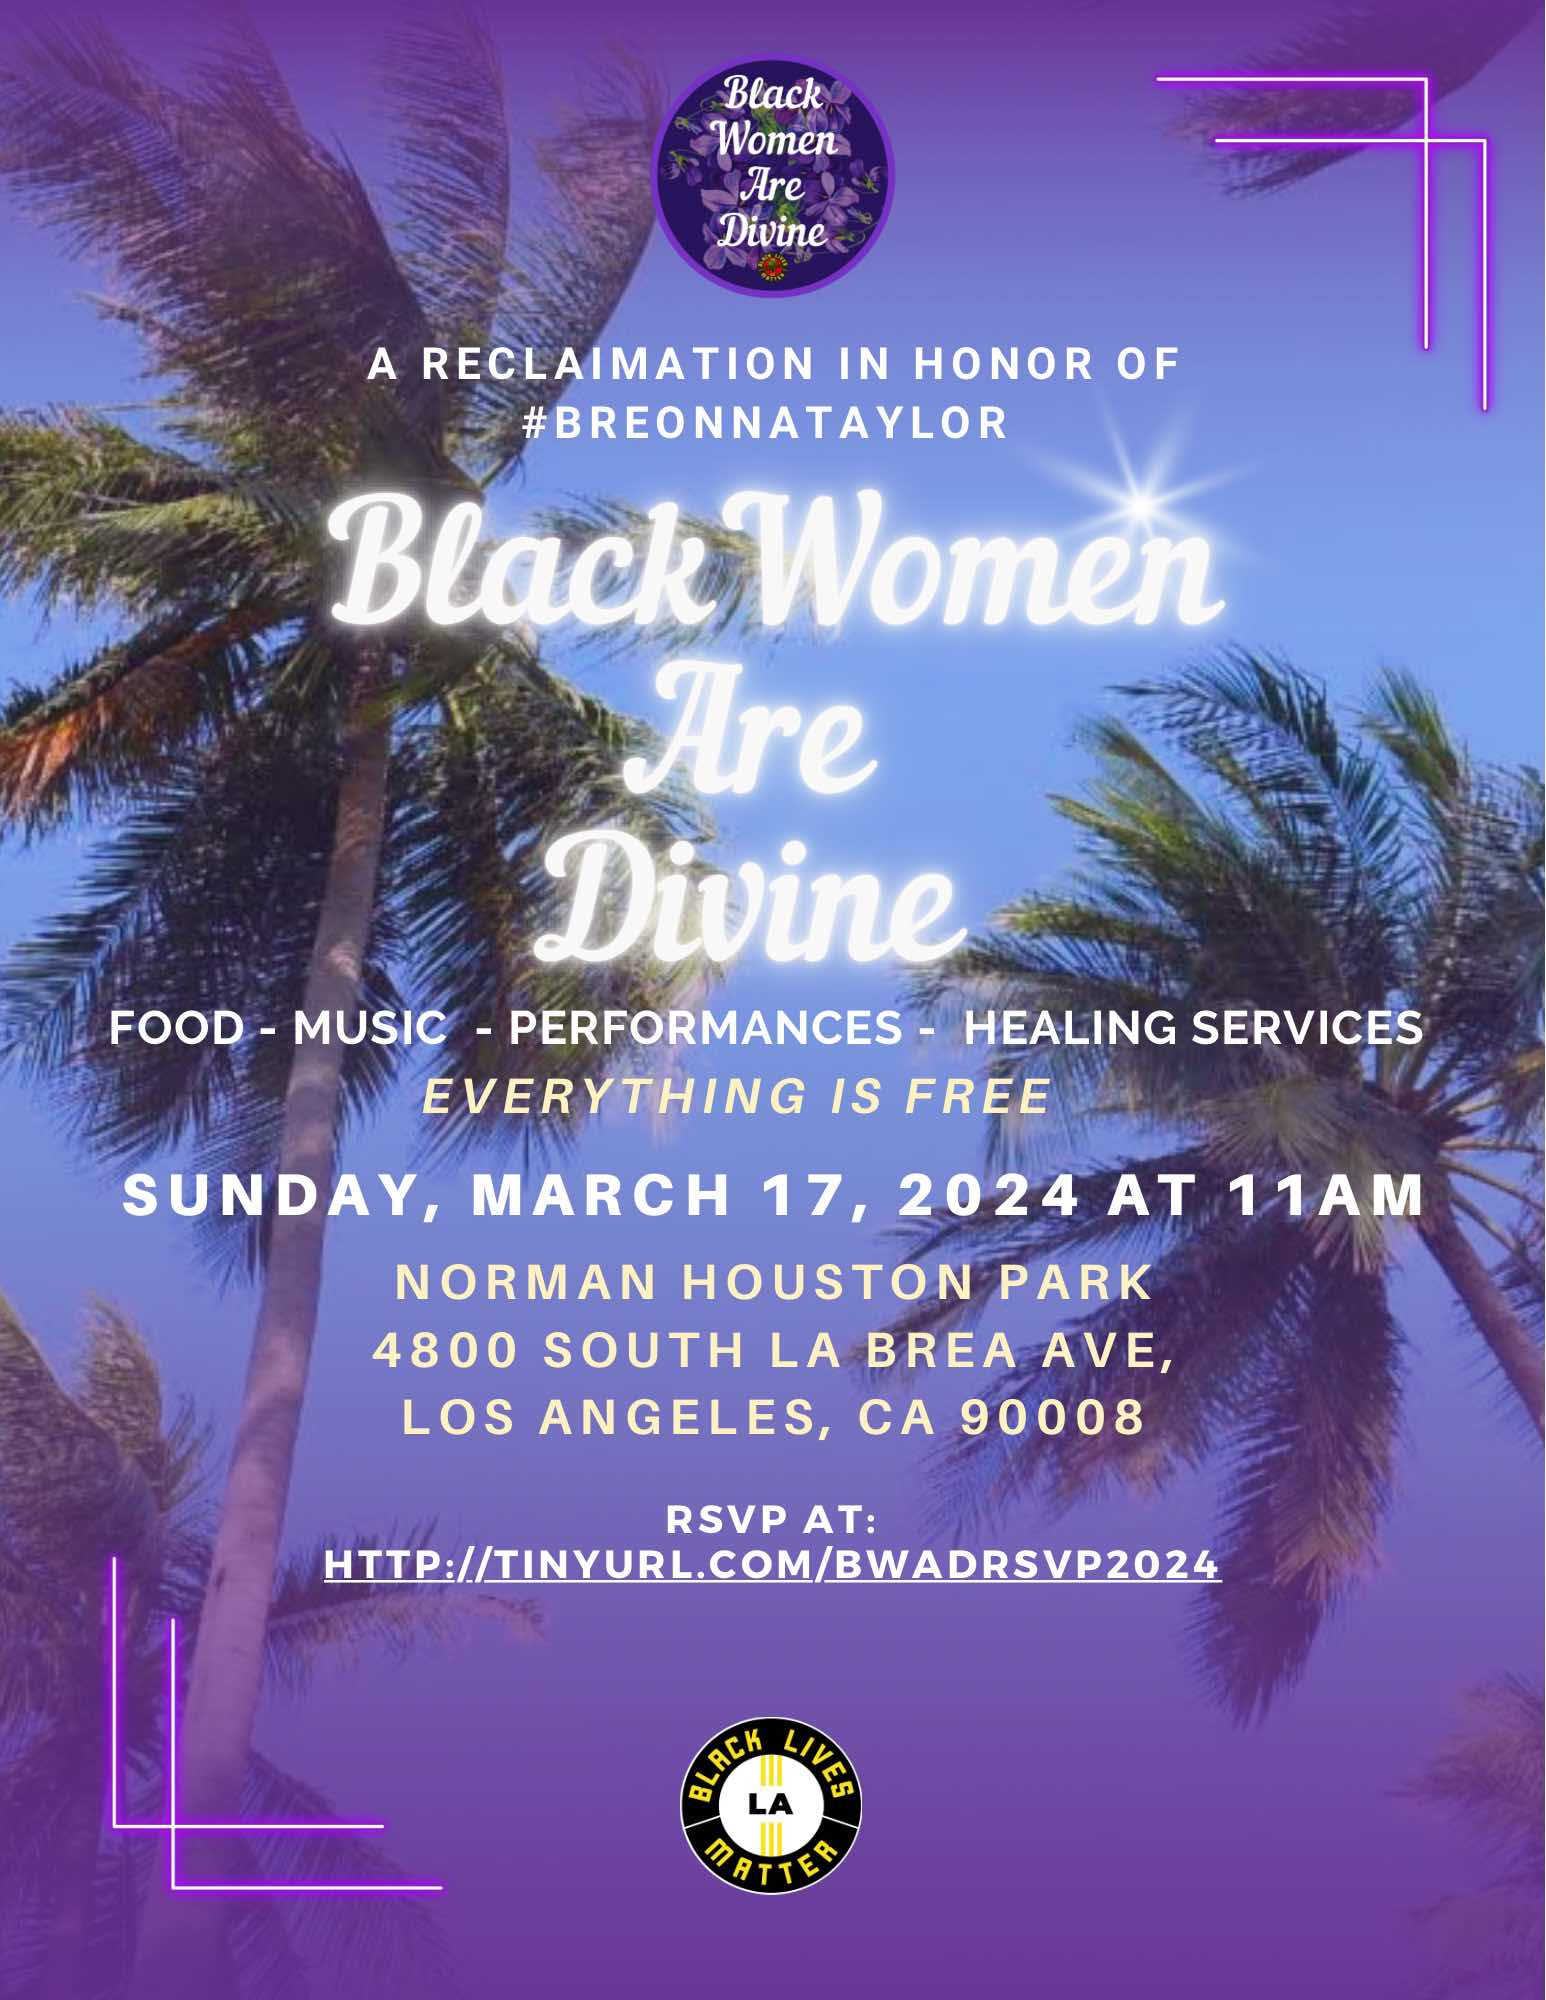 Black Women Are Divine is THIS SUNDAY 3/17 at Norman Houston Park!